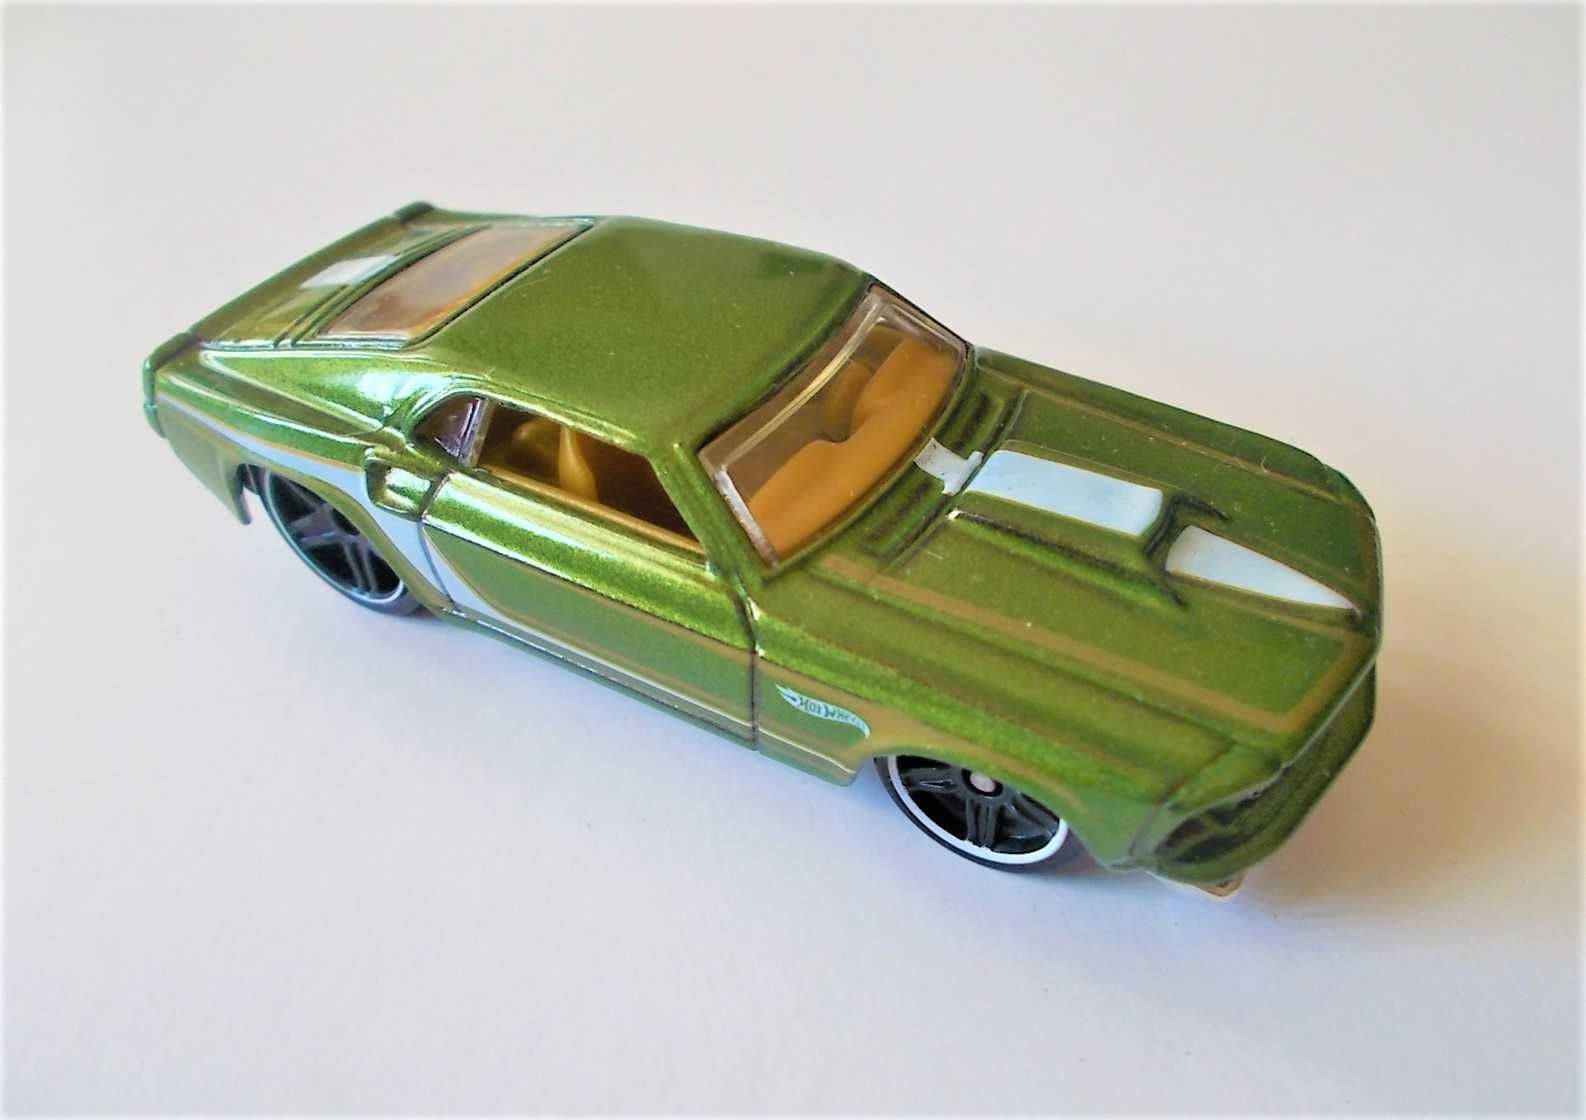 Hot Wheels - '69 Ford Mustang, 2013